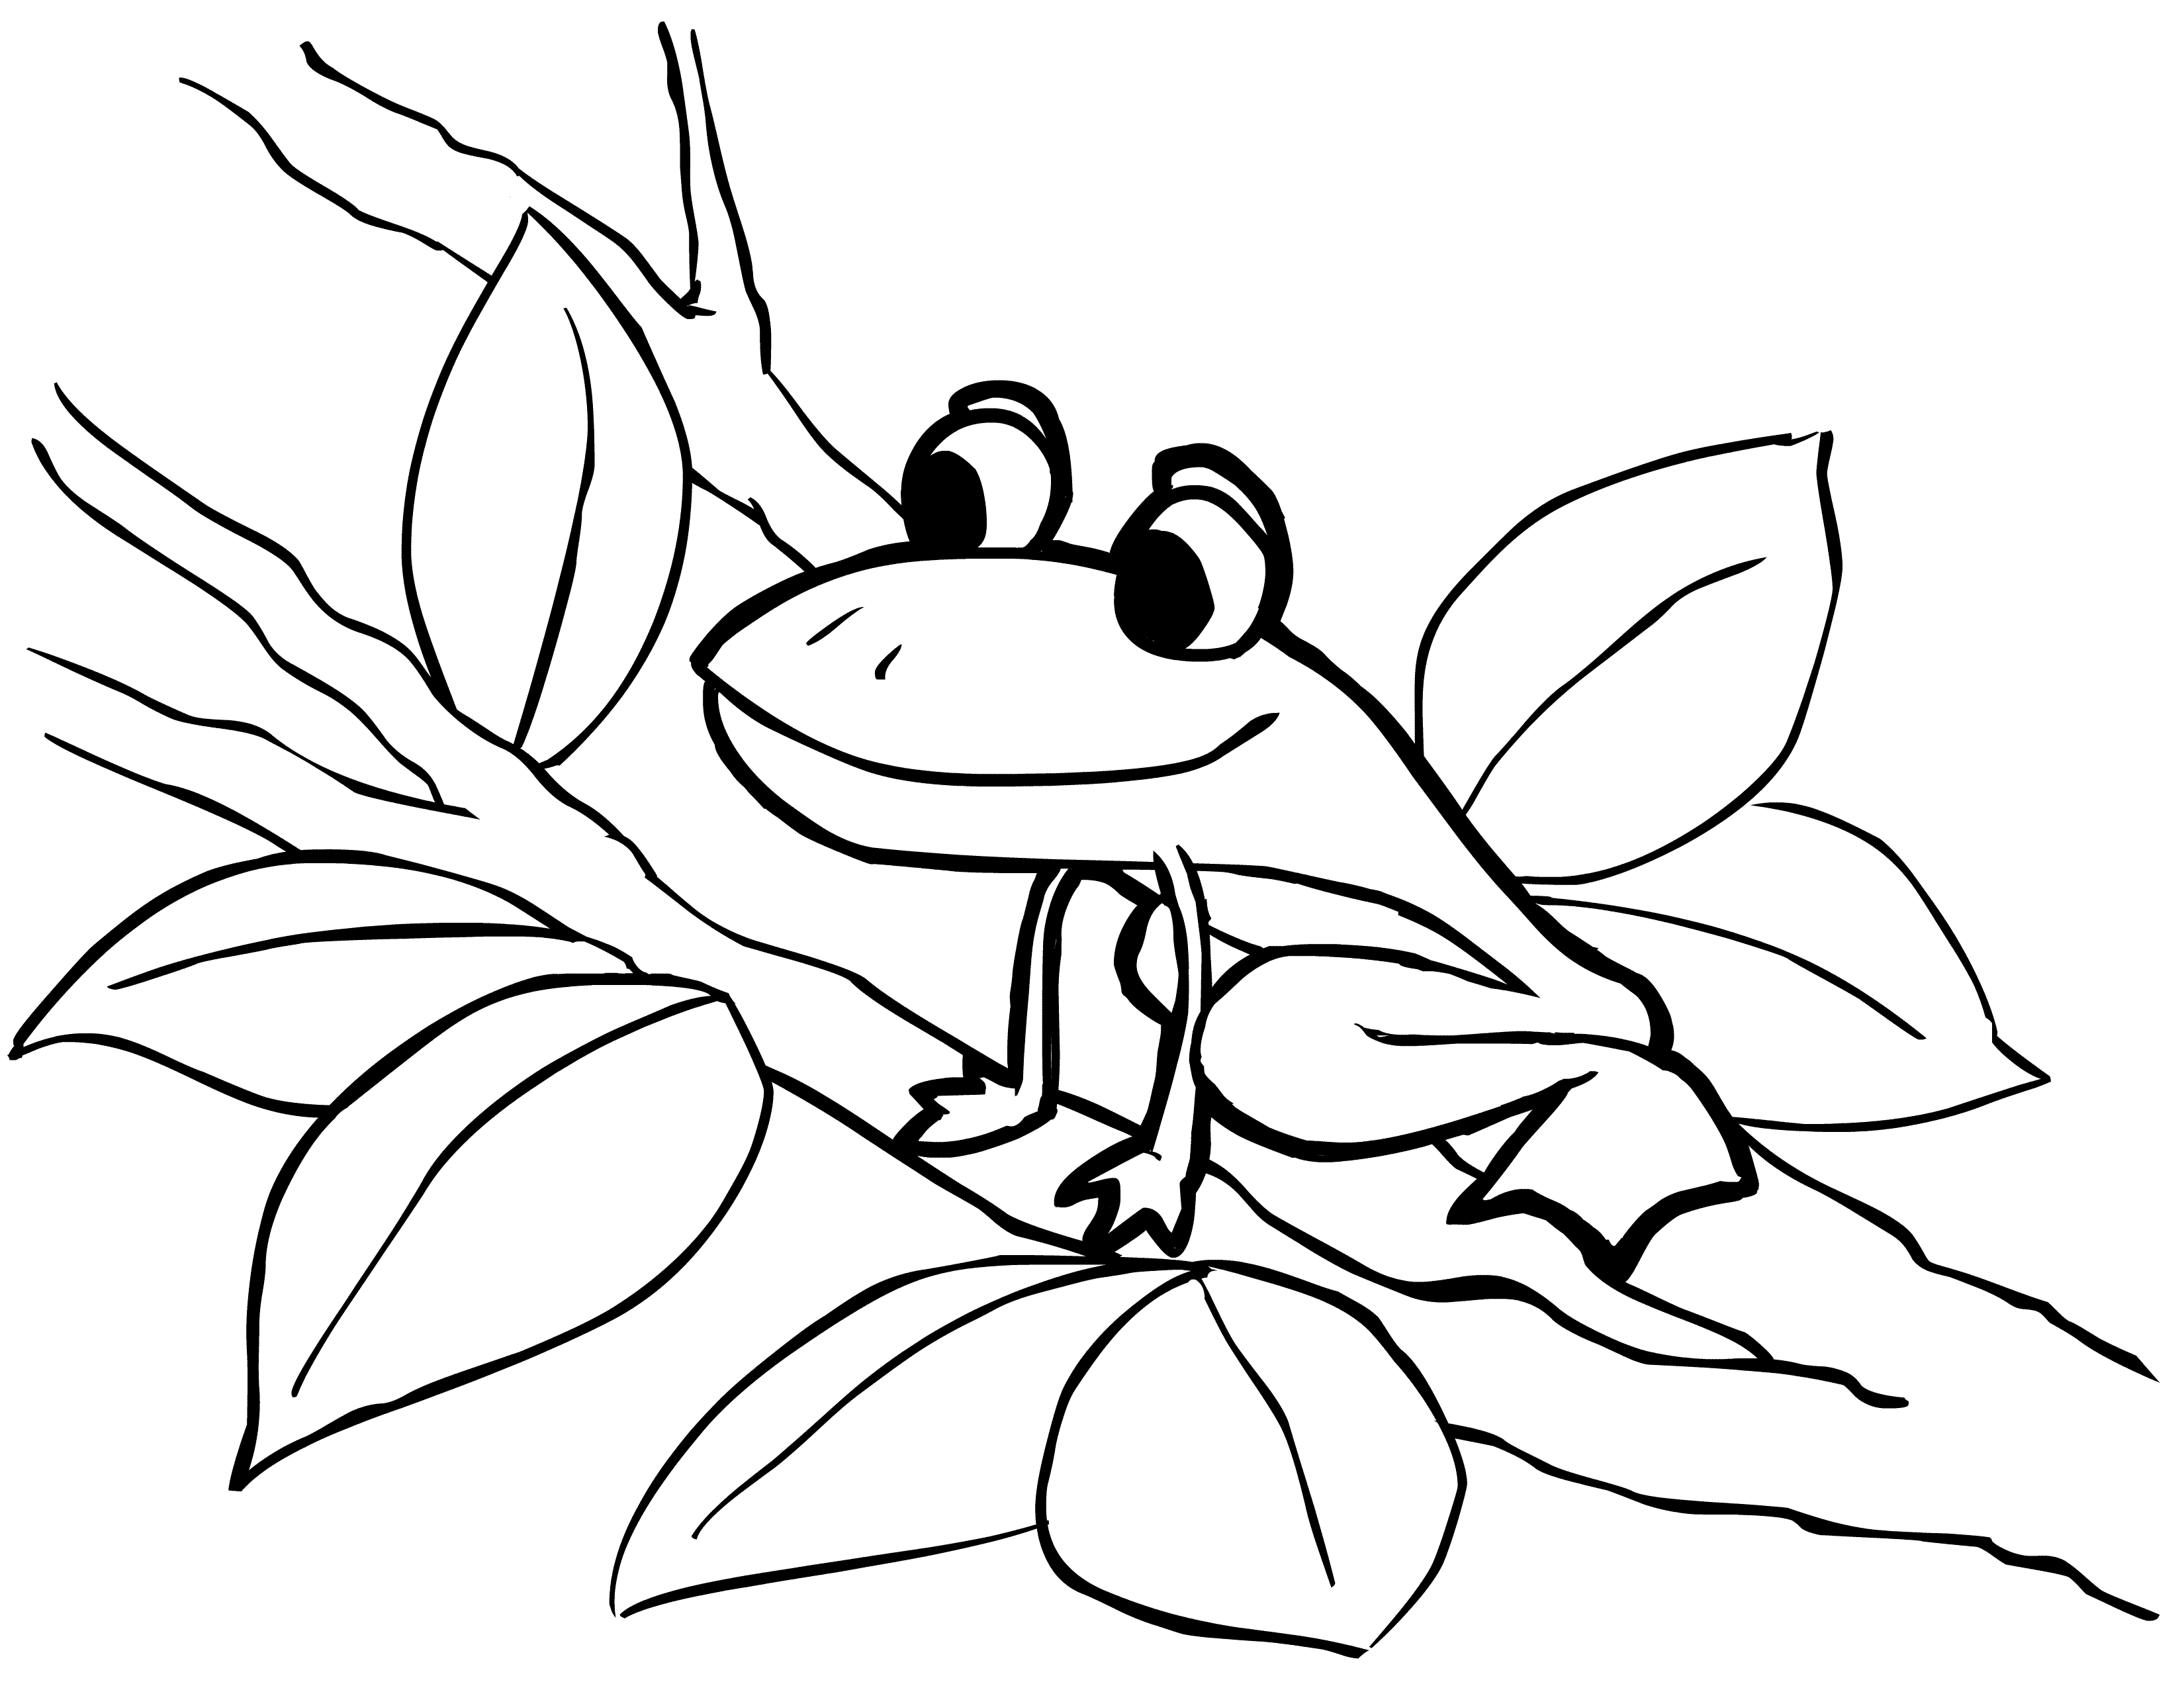 frog images to color printable cartoon cute frog character for kids coloring to frog images color 